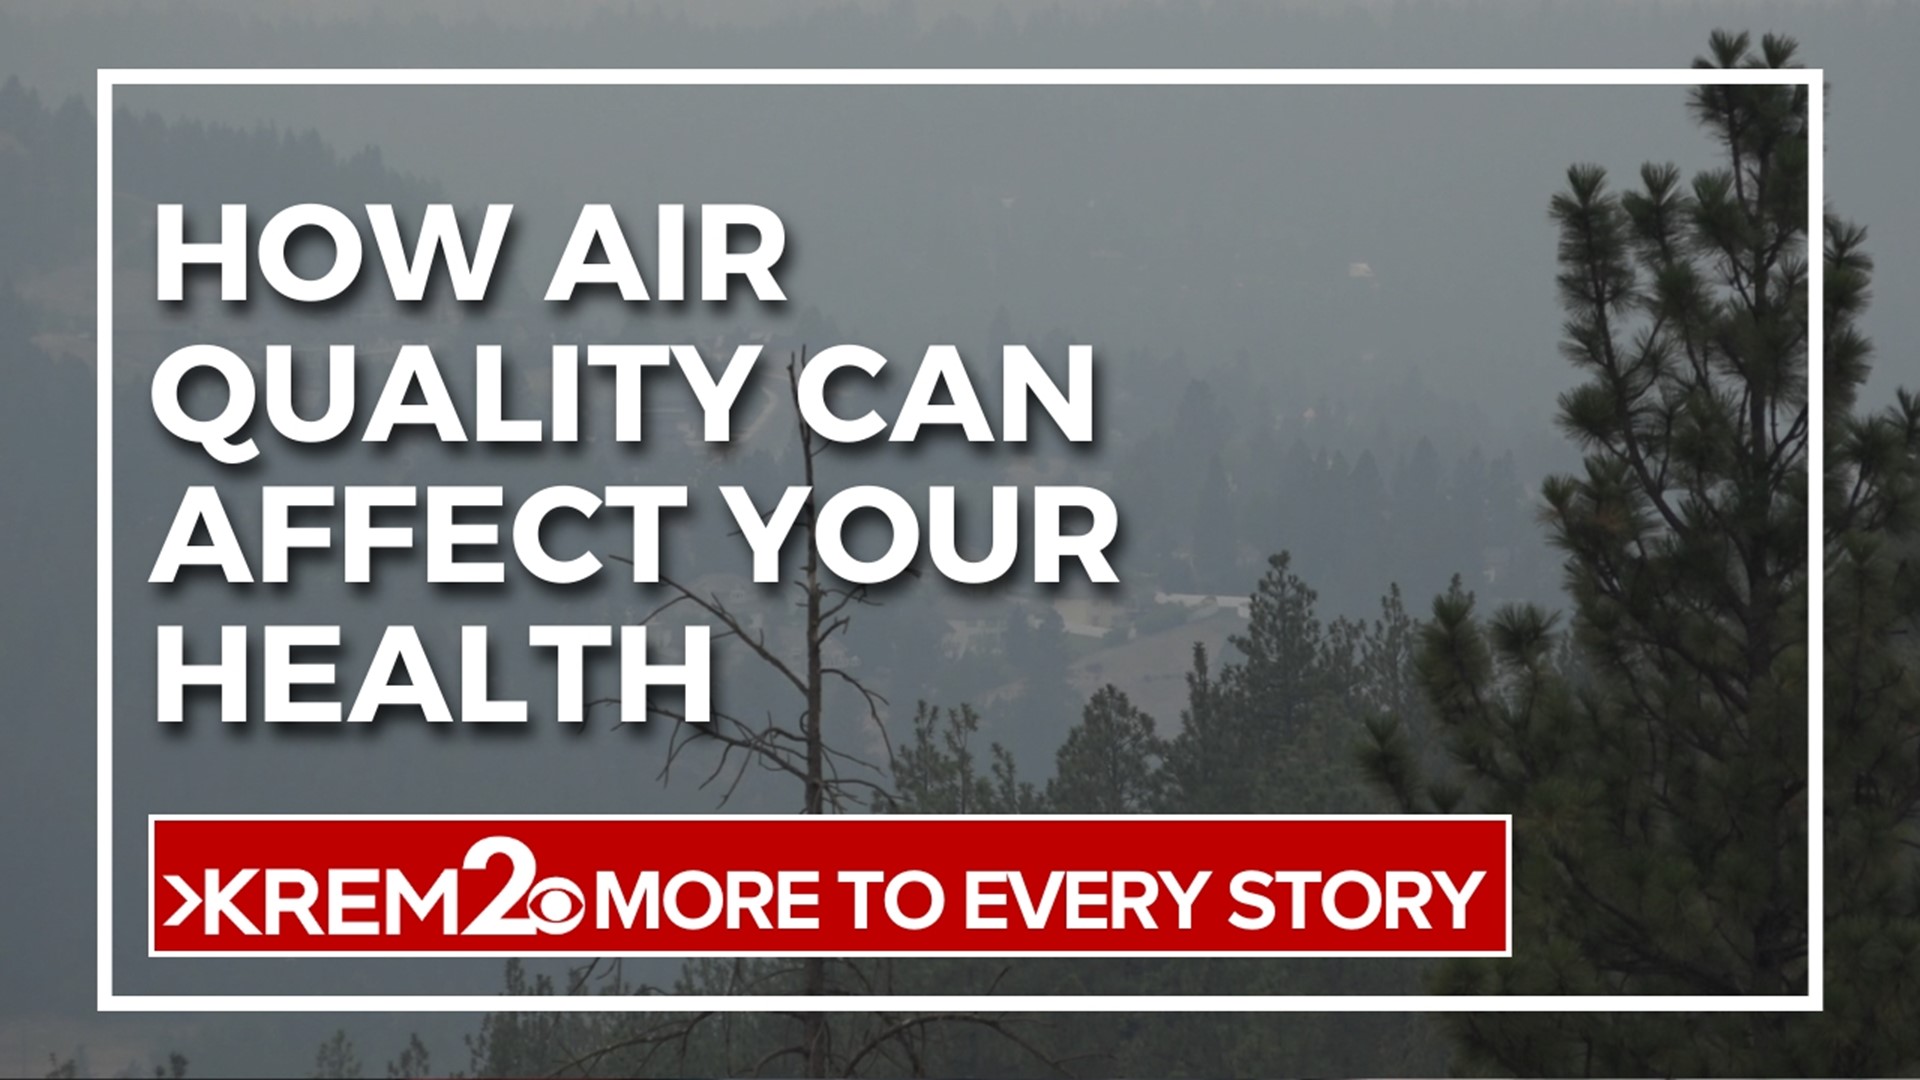 KREM 2's Channing Curtis took a deep dive into how air quality can affect your health.